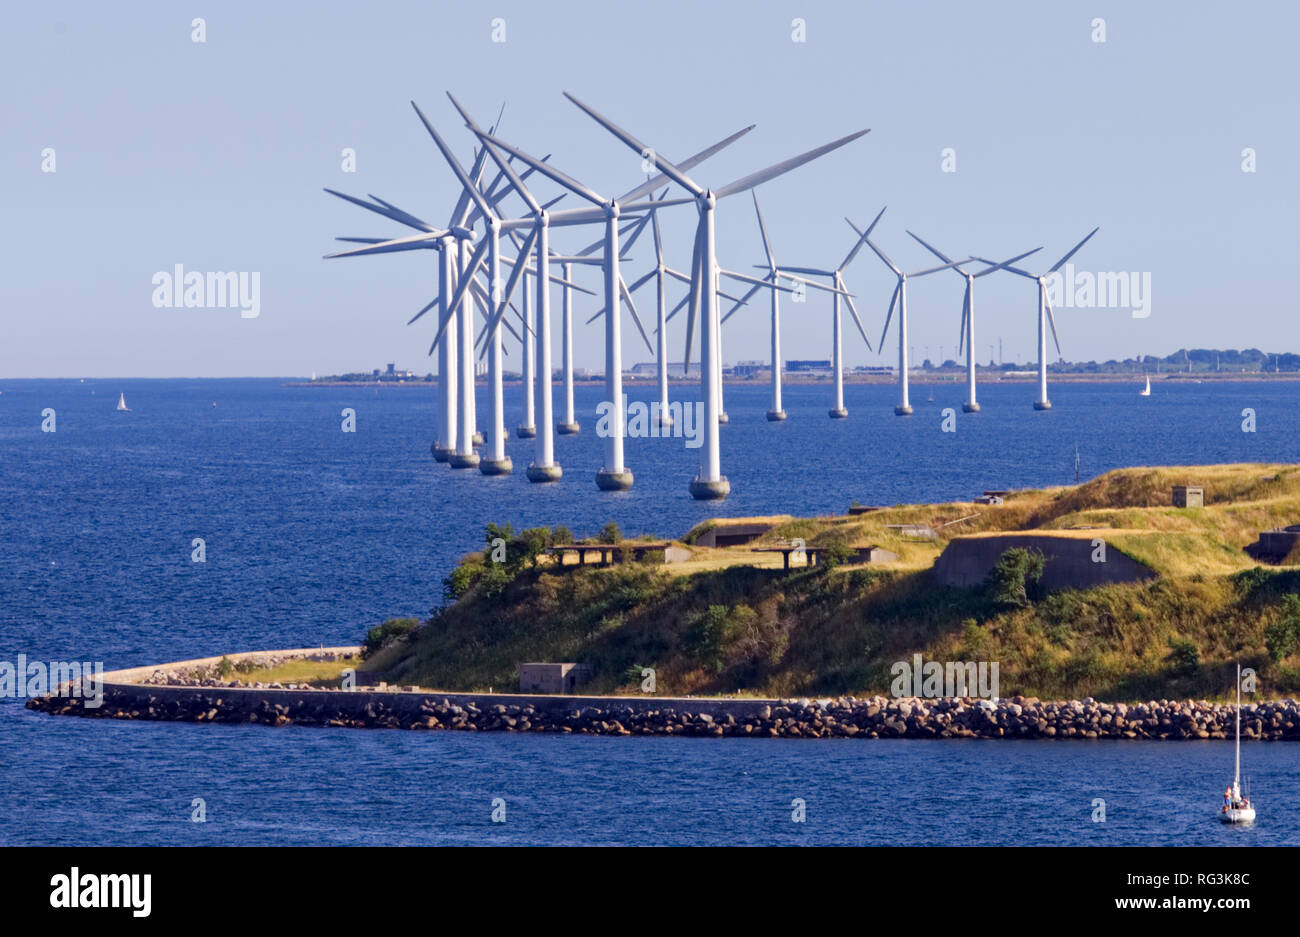 Copenhagen's Energy producing white windmills line along an island by the ocean Stock Photo